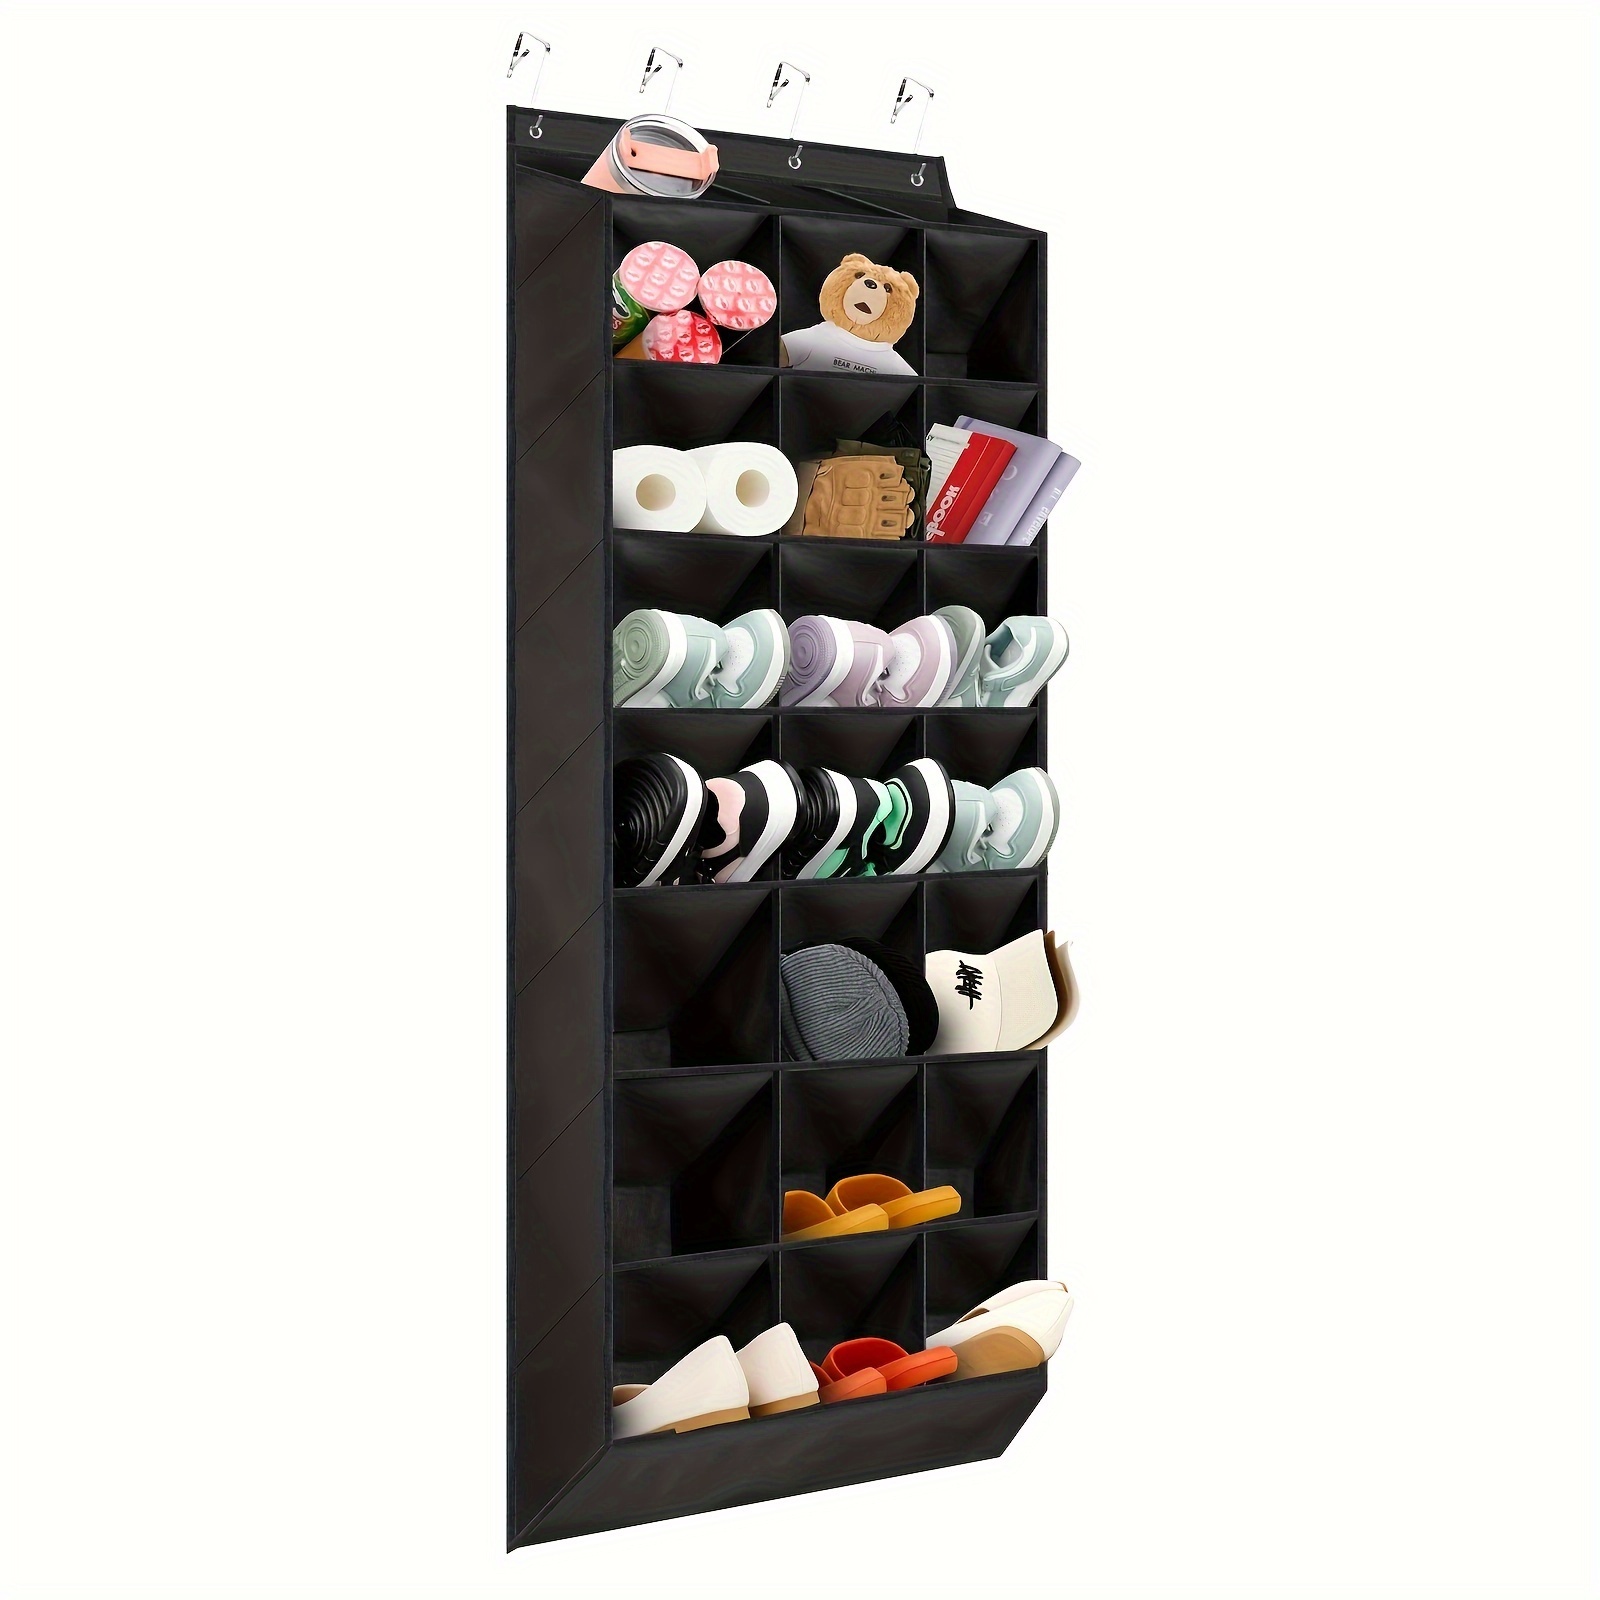 

1pc 24-pocket Double-row Over-the-door Shoe Organizer, Large Capacity Hanging Shoe Rack With 8 Layers, Fabric Wall Closet Storage Hanging Bag, Space-saving Design, Home Essential